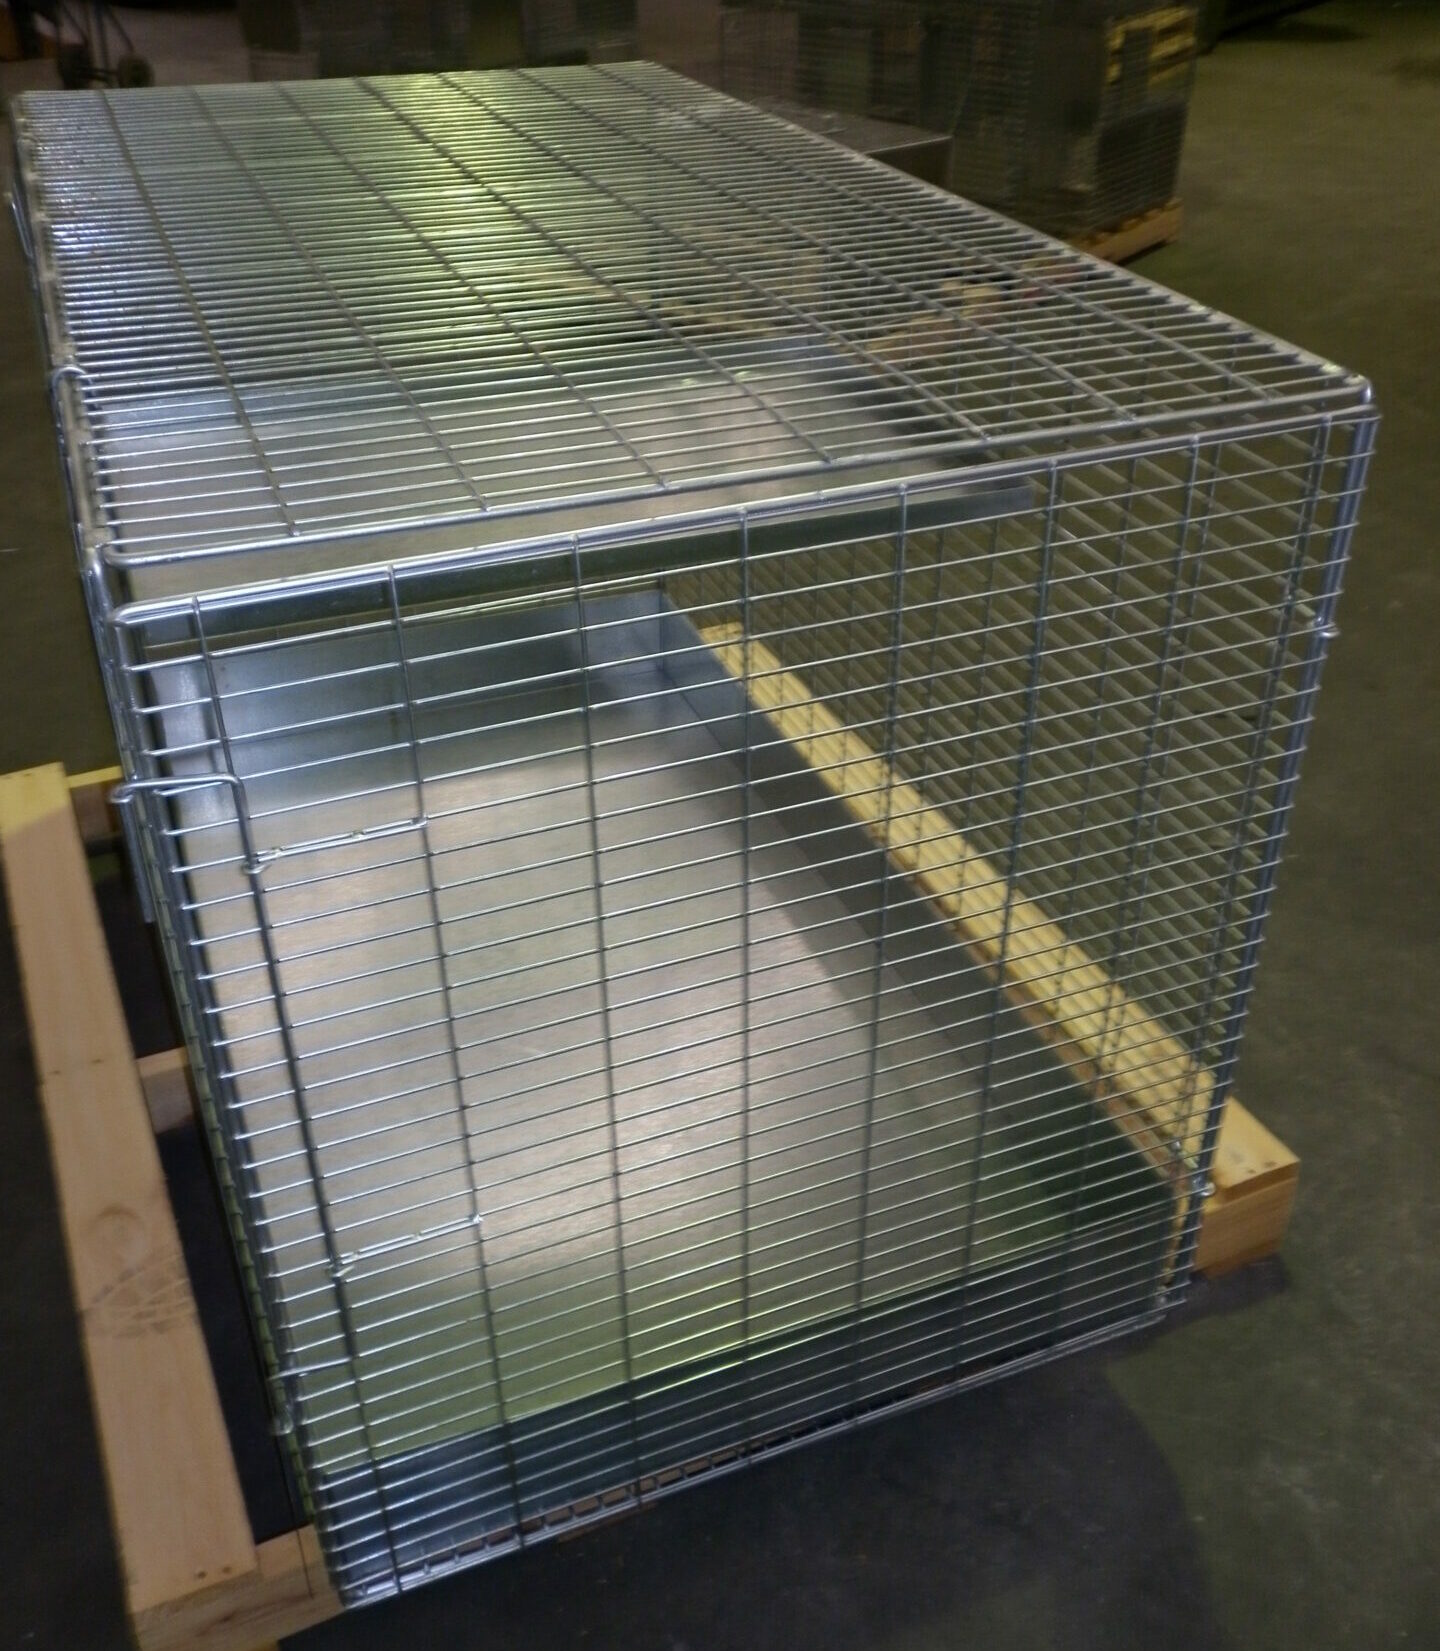 Detail image of Cat Holding Transition Cagefrom Automatic Wire